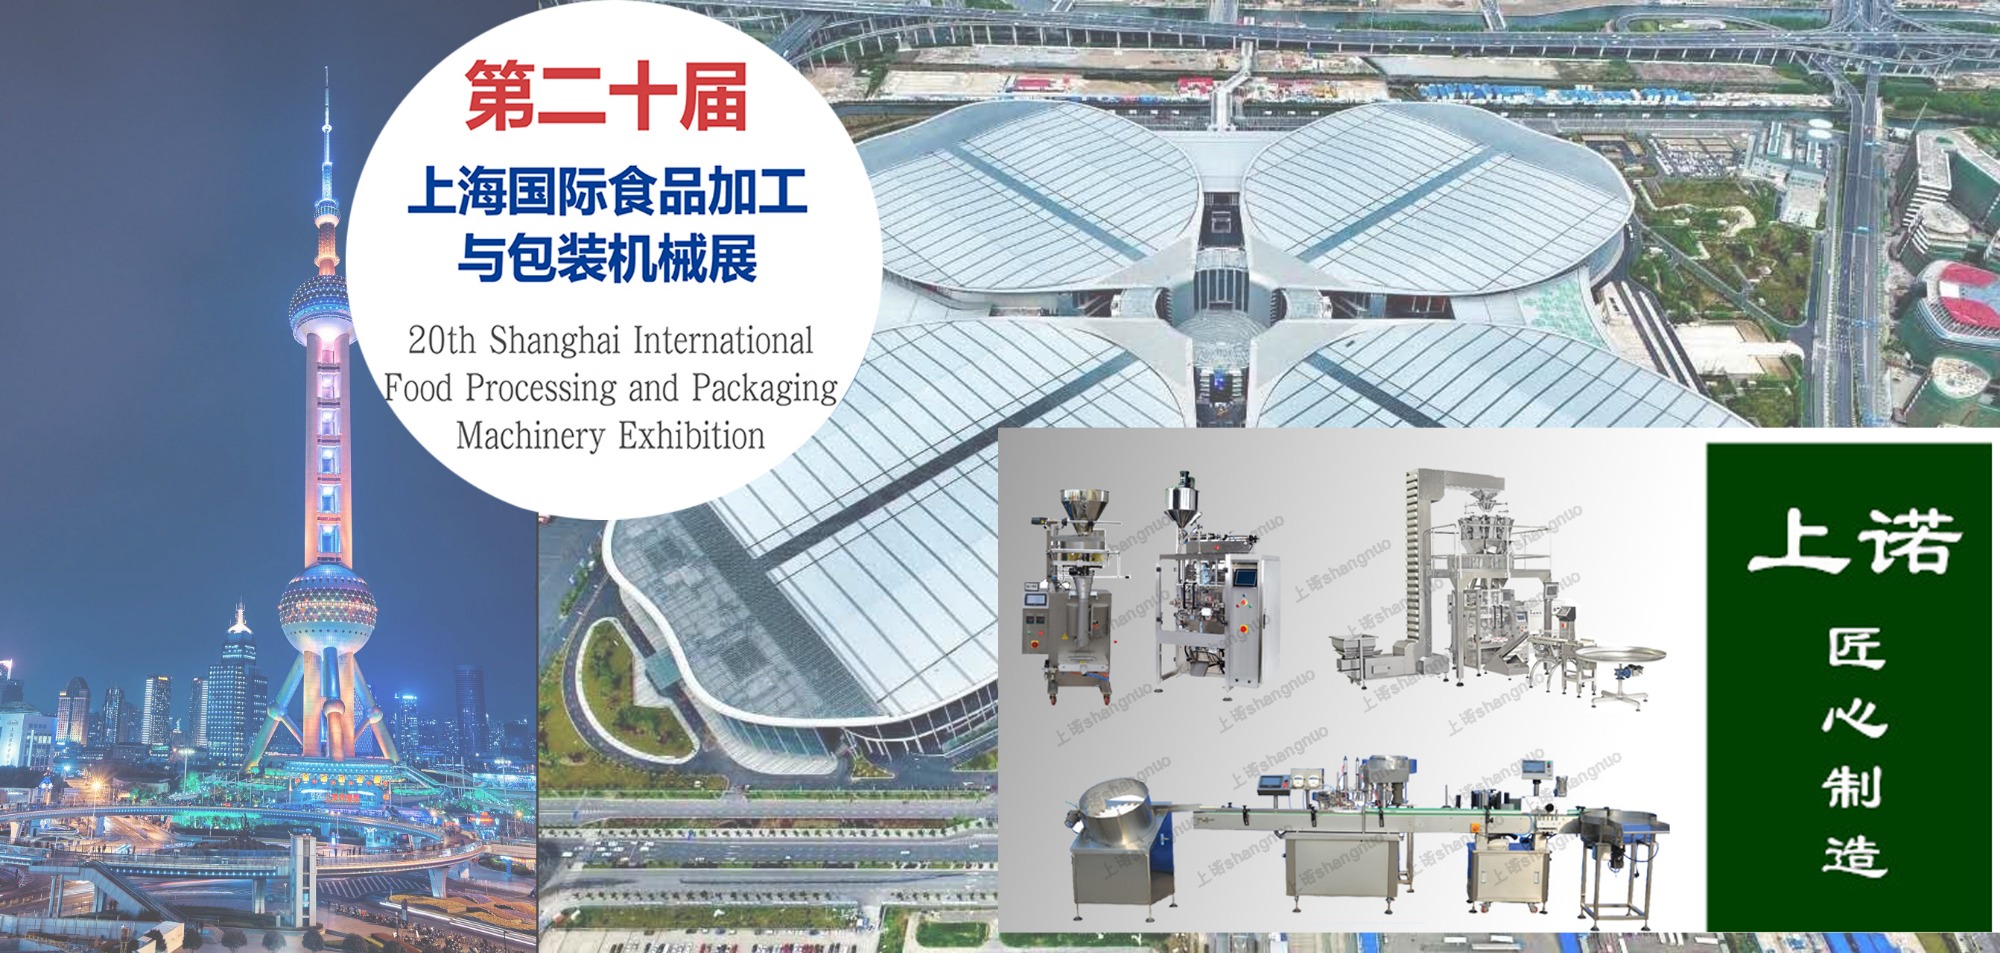 2020 Shanghai International Food Processing and Packaging Machinery Exhibition